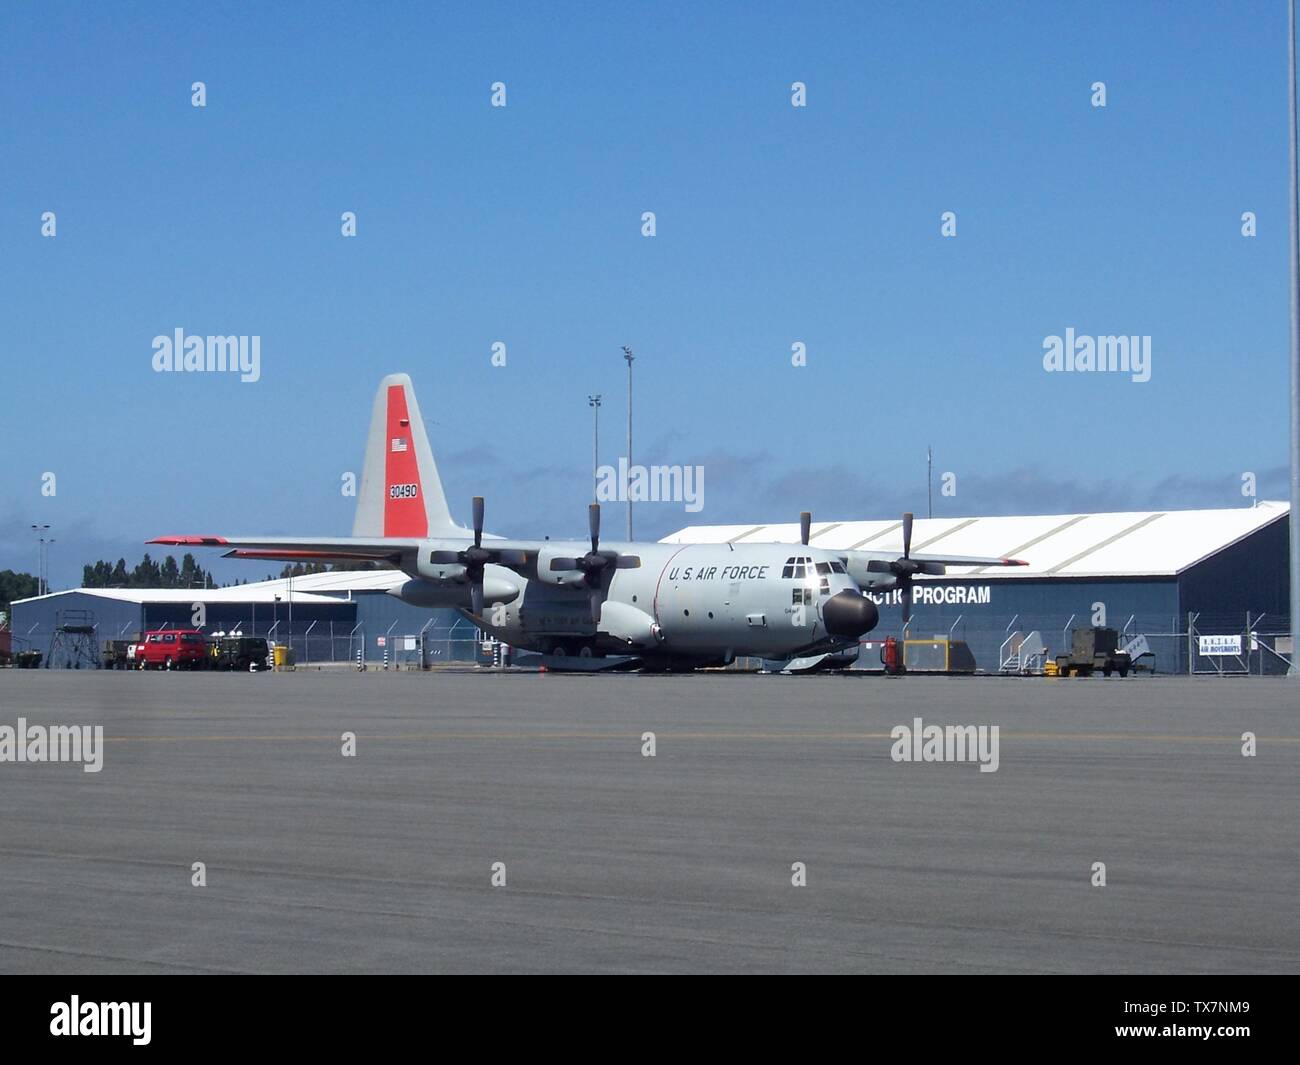 LC-130 aircraft operated by the en:109th Airlift Wing from the en:New York Air National Guard at the en:Christchurch International Airport, en:New Zealand.; 17 December 2007 (original upload date); Transferred from en.pedia to Commons by Smoth 007.; The original uploader was Ndunruh at English pedia.; Stock Photo